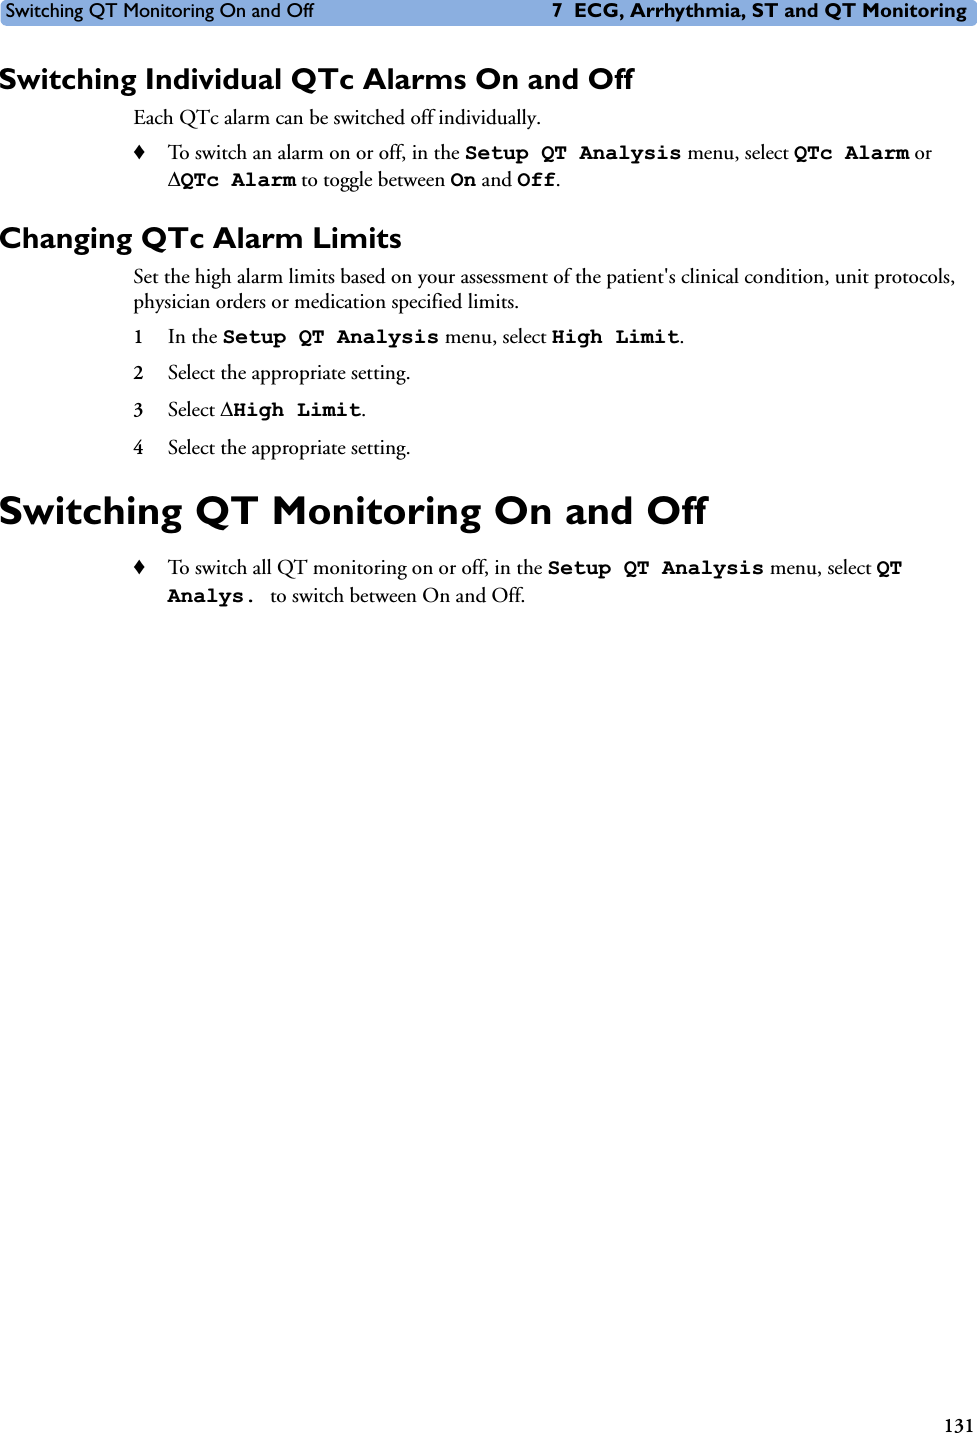 Switching QT Monitoring On and Off 7 ECG, Arrhythmia, ST and QT Monitoring131Switching Individual QTc Alarms On and OffEach QTc alarm can be switched off individually. ♦To switch an alarm on or off, in the Setup QT Analysis menu, select QTc Alarm or &apos;QTc Alarm to toggle between On and Off. Changing QTc Alarm LimitsSet the high alarm limits based on your assessment of the patient&apos;s clinical condition, unit protocols, physician orders or medication specified limits.1In the Setup QT Analysis menu, select High Limit.2Select the appropriate setting. 3Select &apos;High Limit.4Select the appropriate setting.Switching QT Monitoring On and Off♦To switch all QT monitoring on or off, in the Setup QT Analysis menu, select QT Analys. to switch between On and Off.